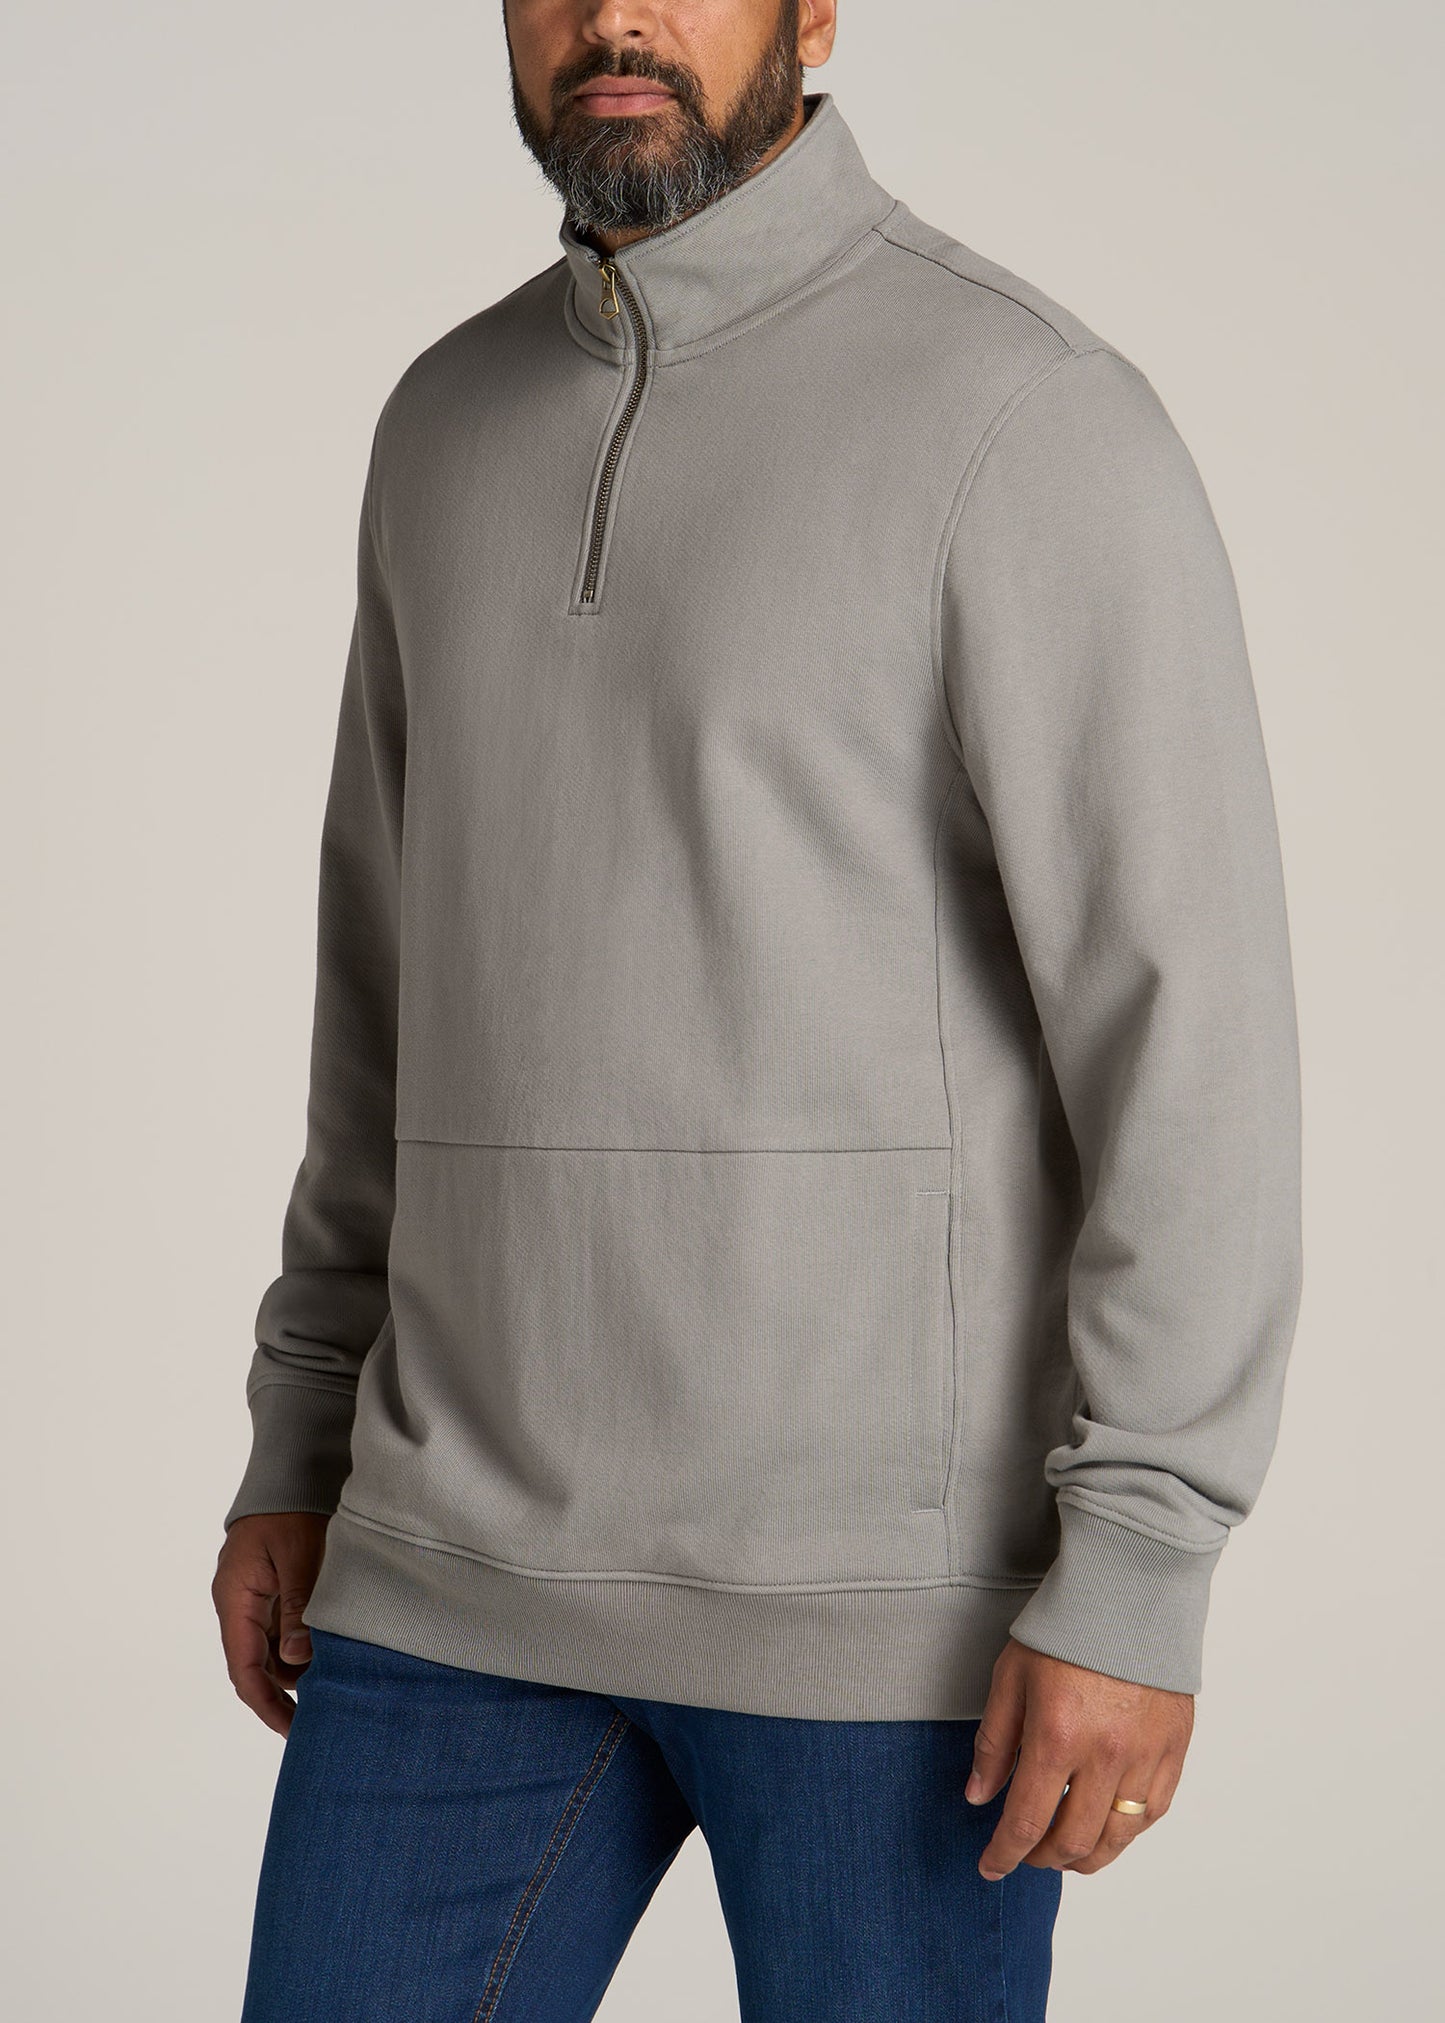 LJ-Heavyweight-French-Terry-Quarter-Zip-Pullover-Pewter-side